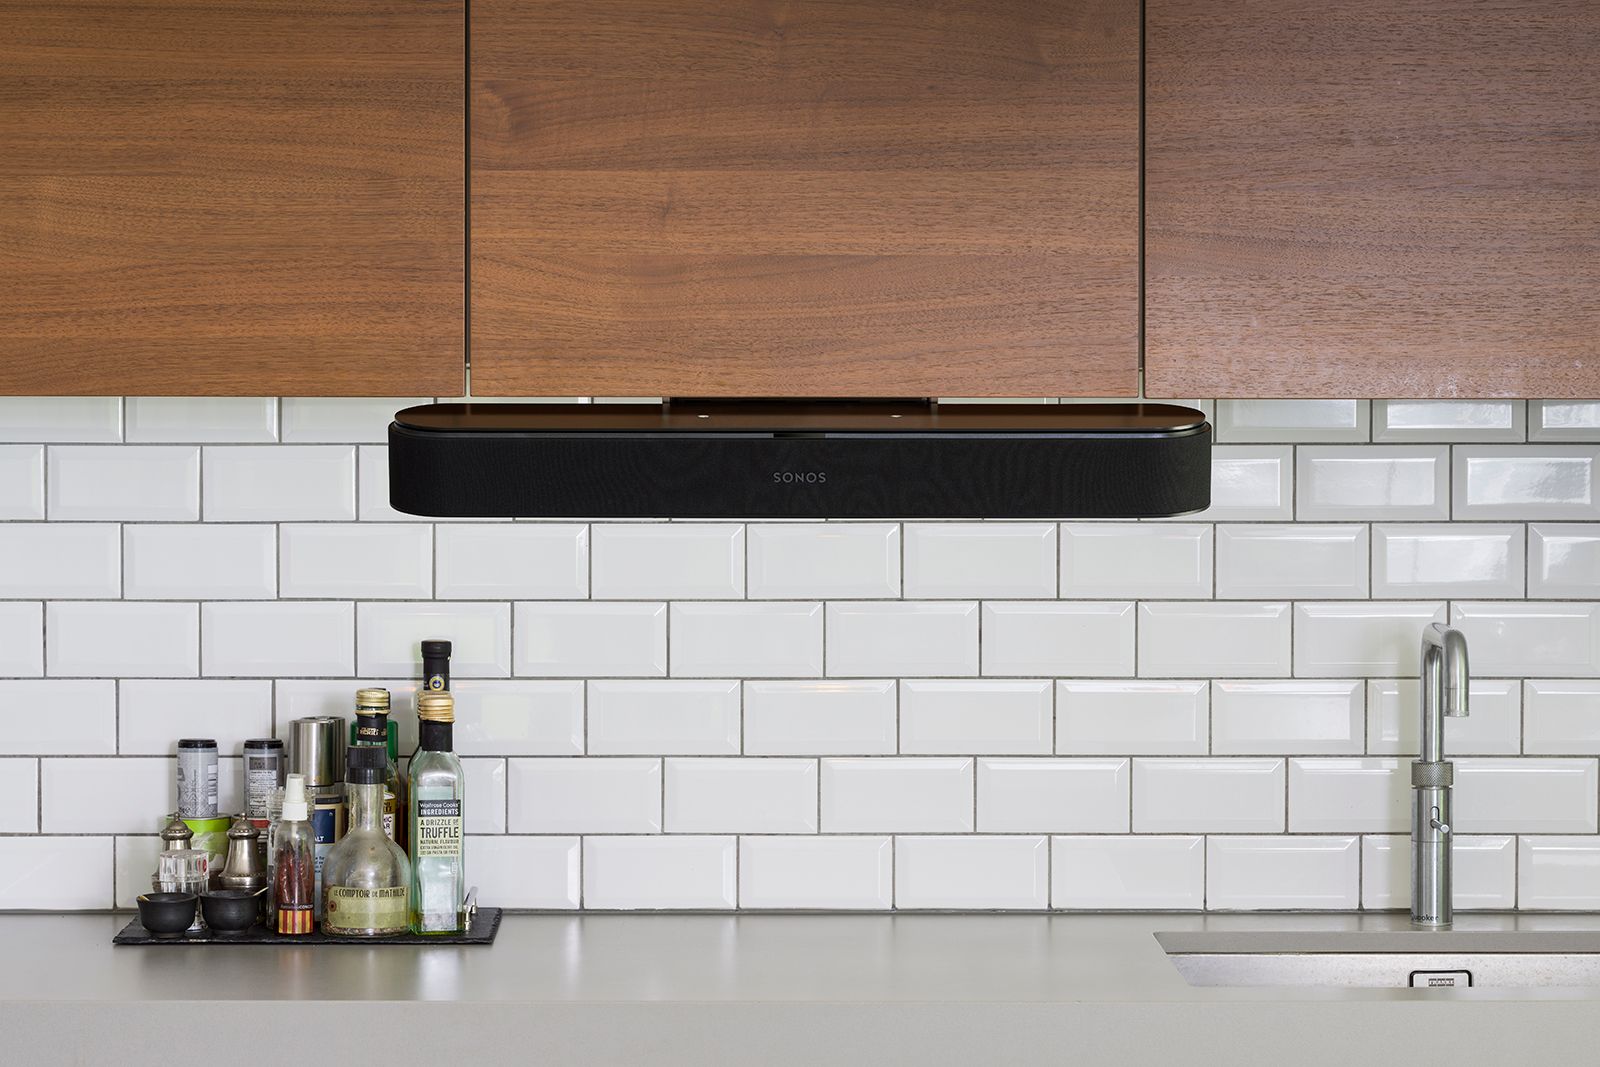 Five reasons to buy the Sonos Beam image 1